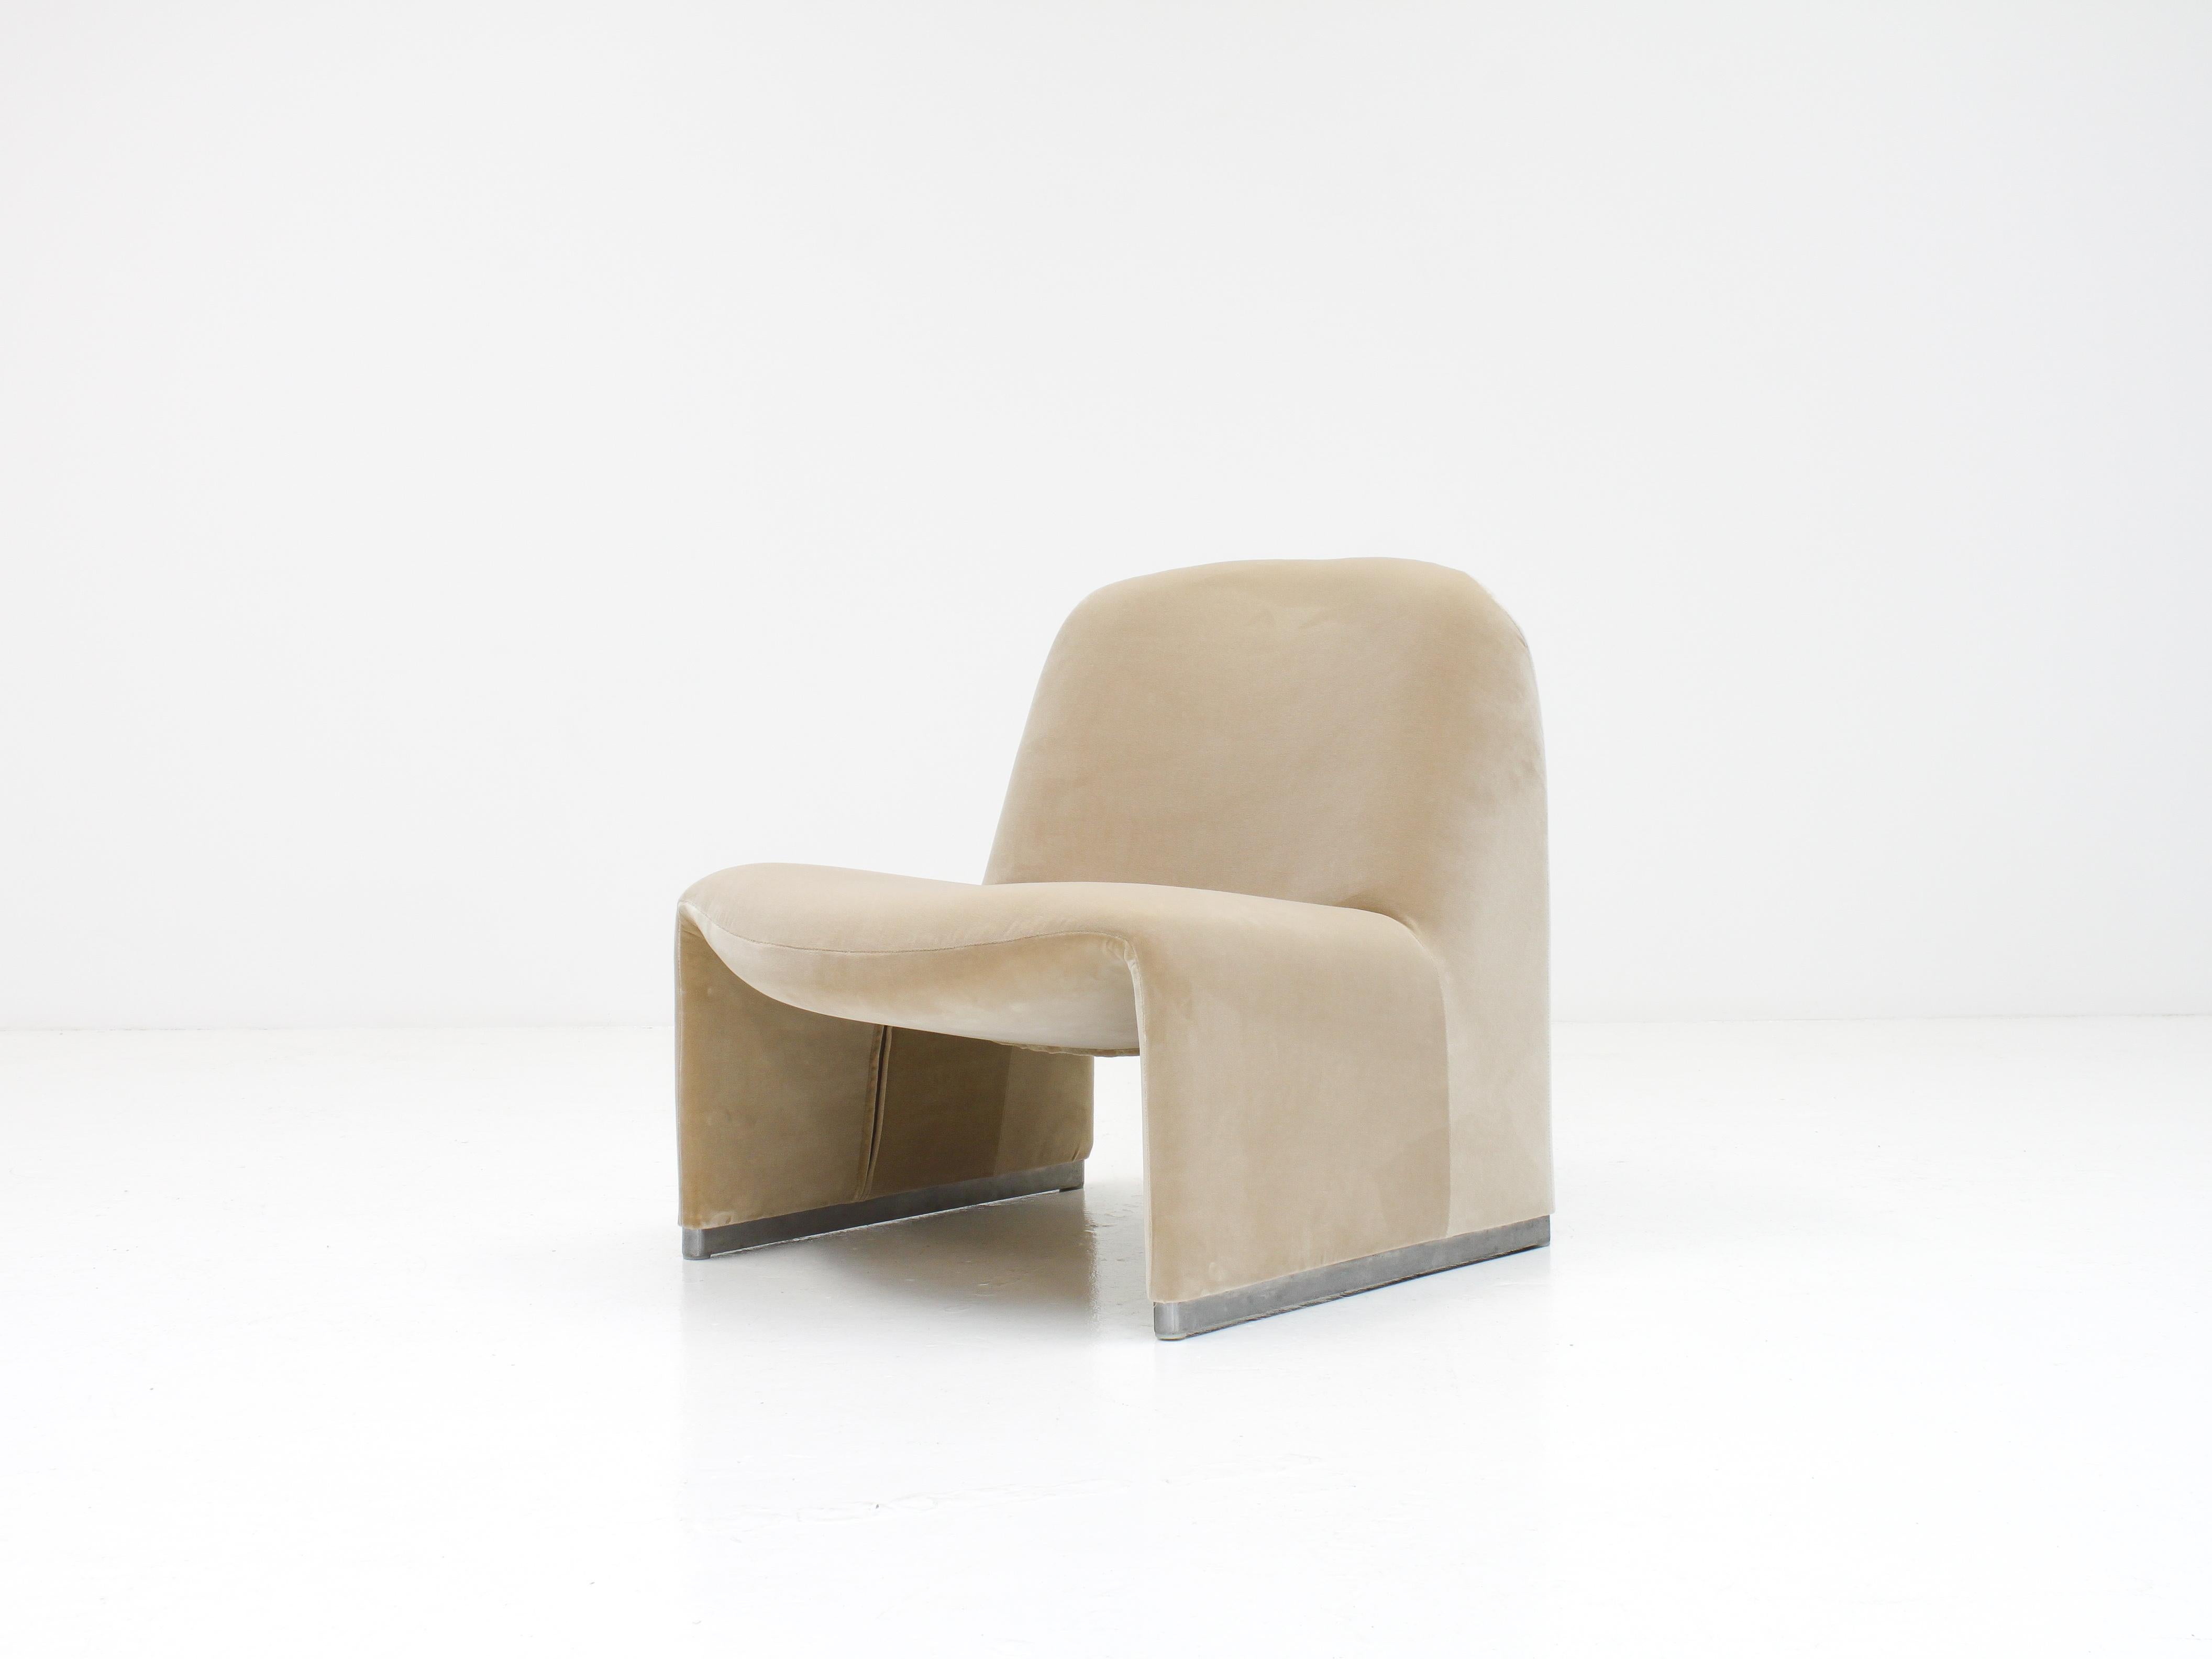 A single Giancarlo Piretti “Alky” chair newly upholstered in Designers Guild linen colored cotton velvet. 

Manufactured by Artifort in the 1970s.

The organic shape offers a minimal appearance but also comfort.

*Potentially customizable in over